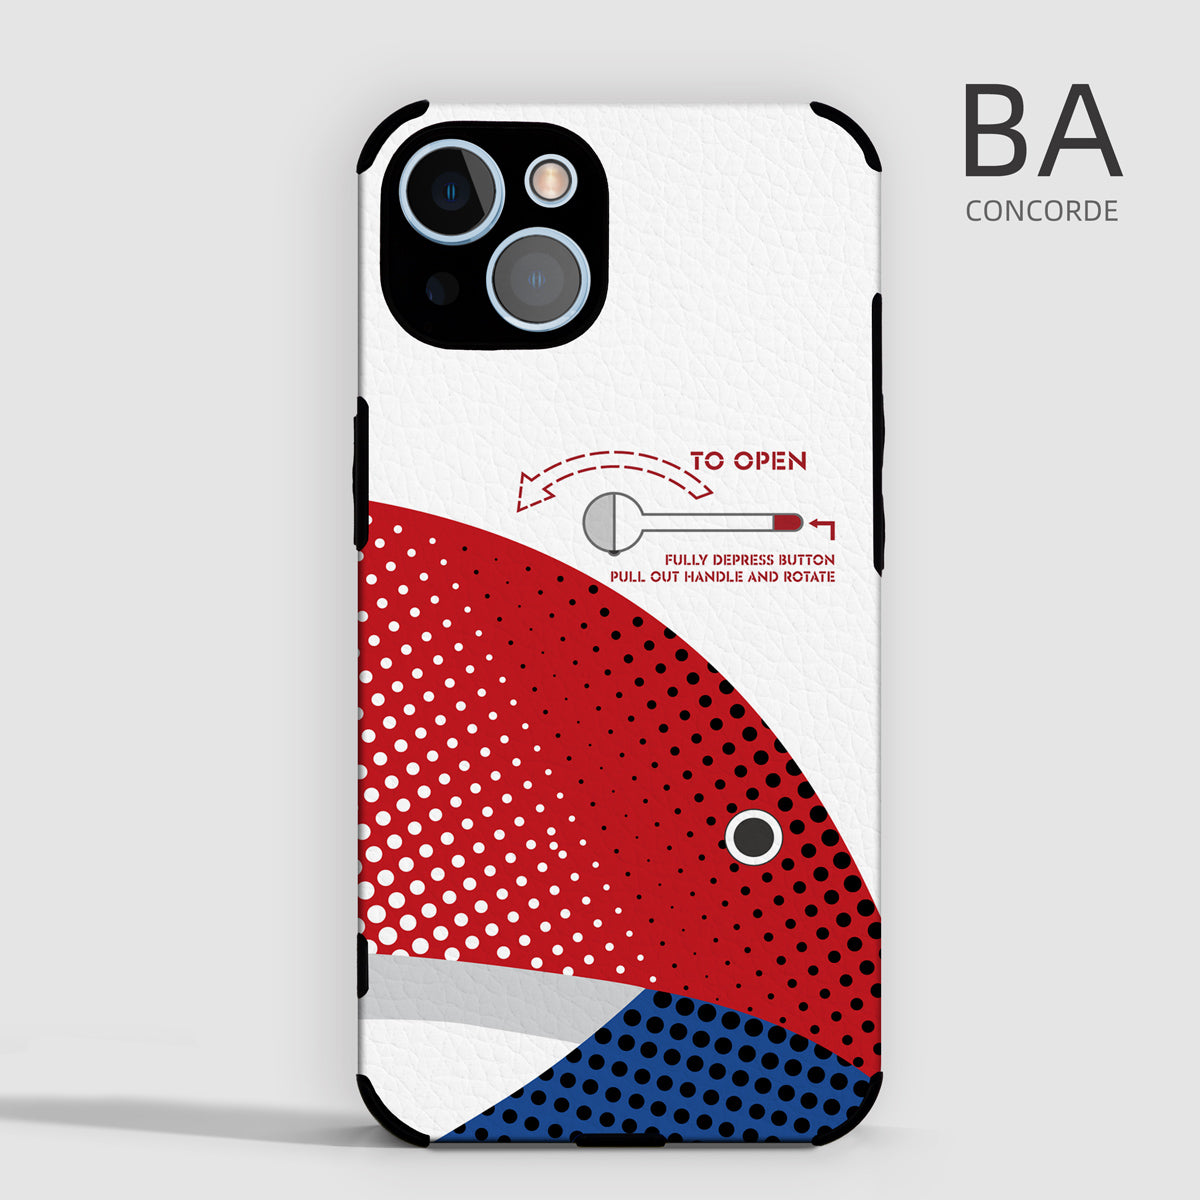 British Airways Concorde BA phone case Apple Huawei XIaomi Android Samsung Redmi OnePlus perfect gift for pilot crew avgeeks aviation